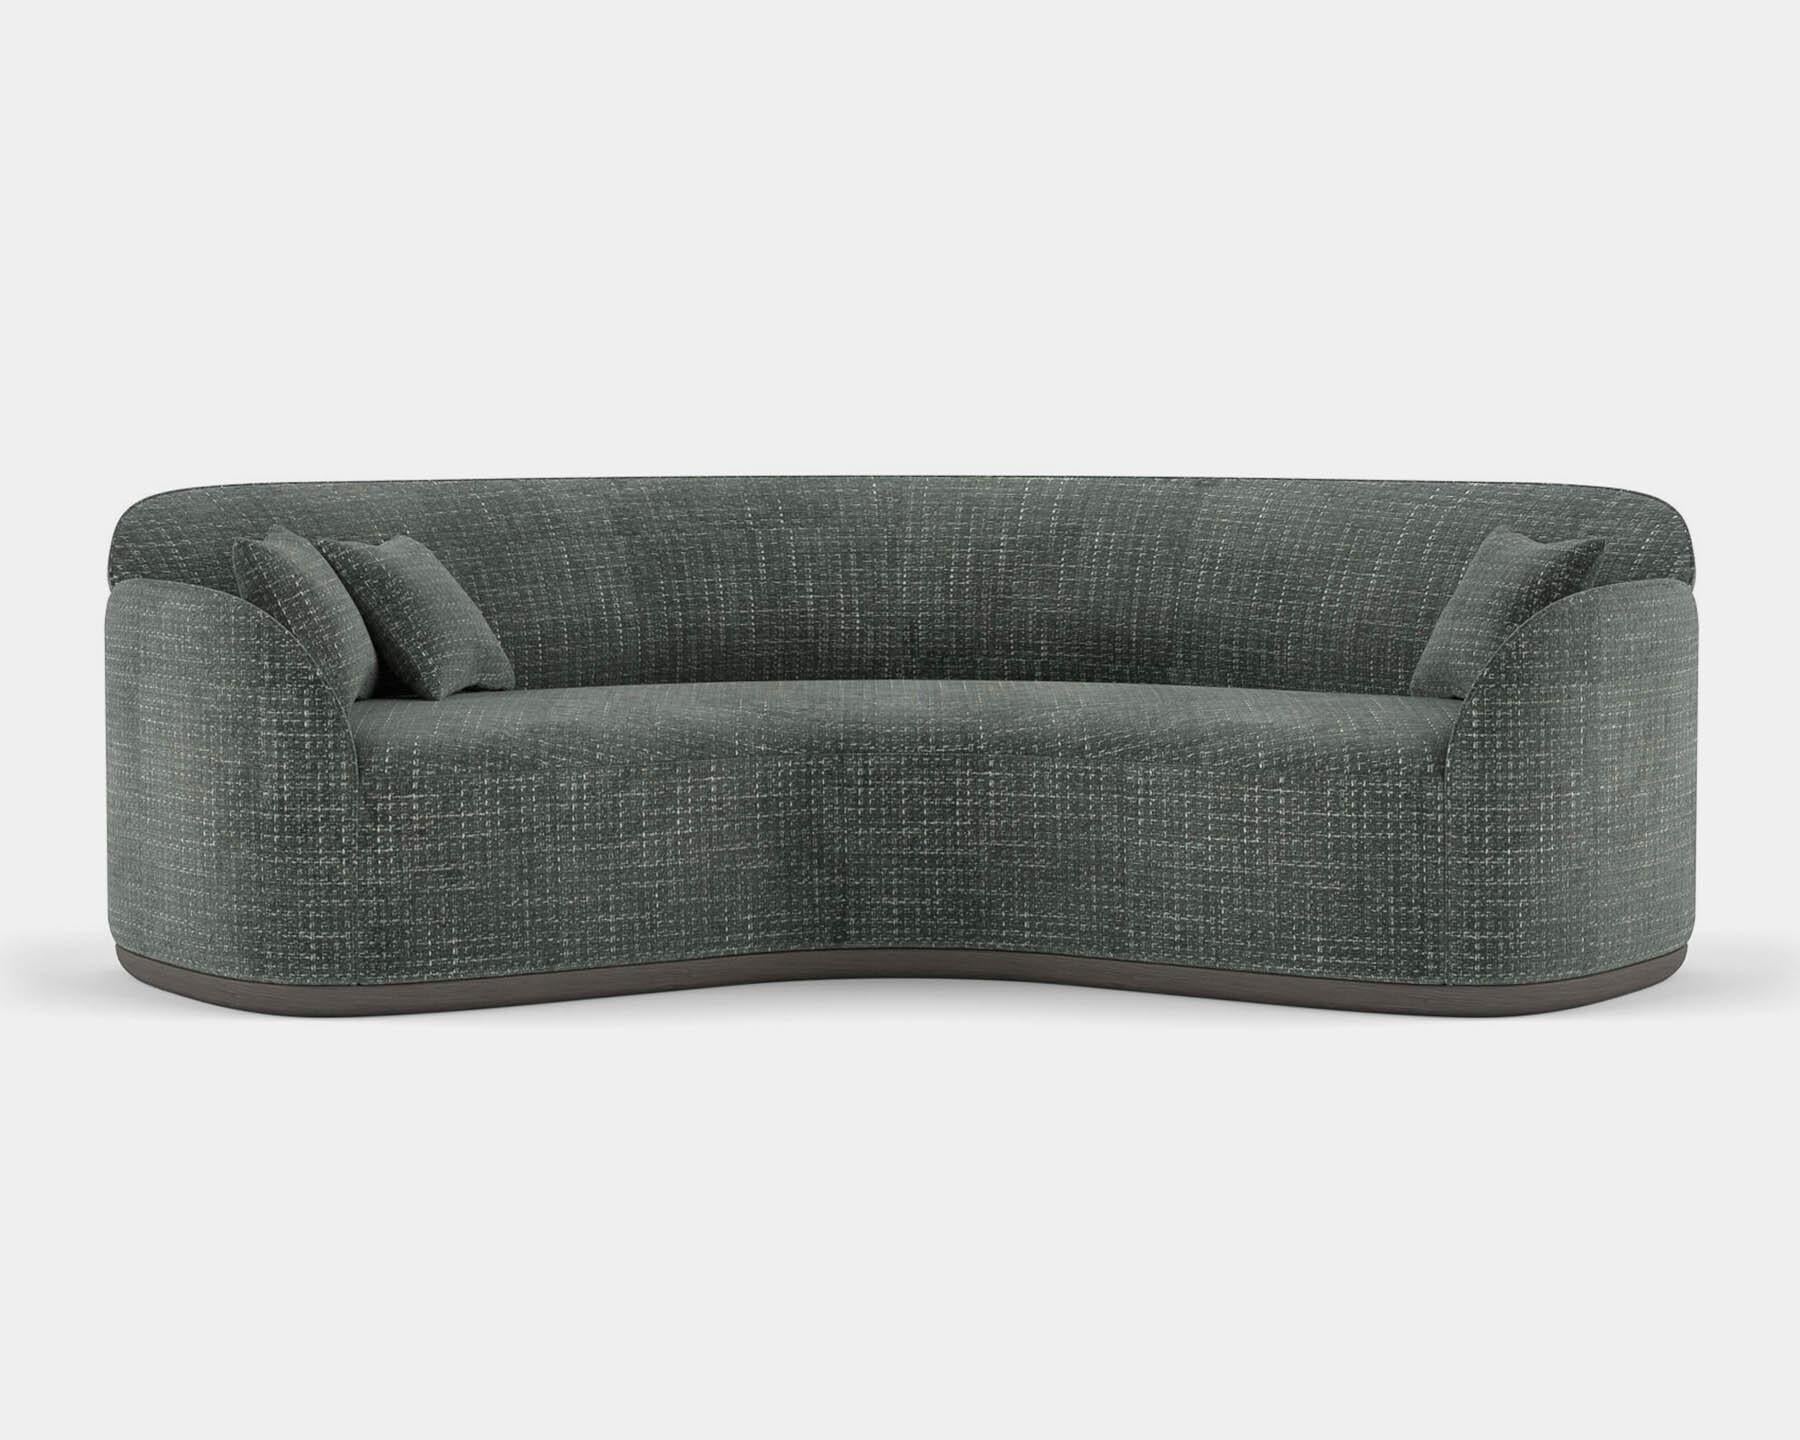 Contemporary Curved Sofa 'Unio' by Poiat, Pergamena 017 Fabric by Dedar In New Condition For Sale In Paris, FR